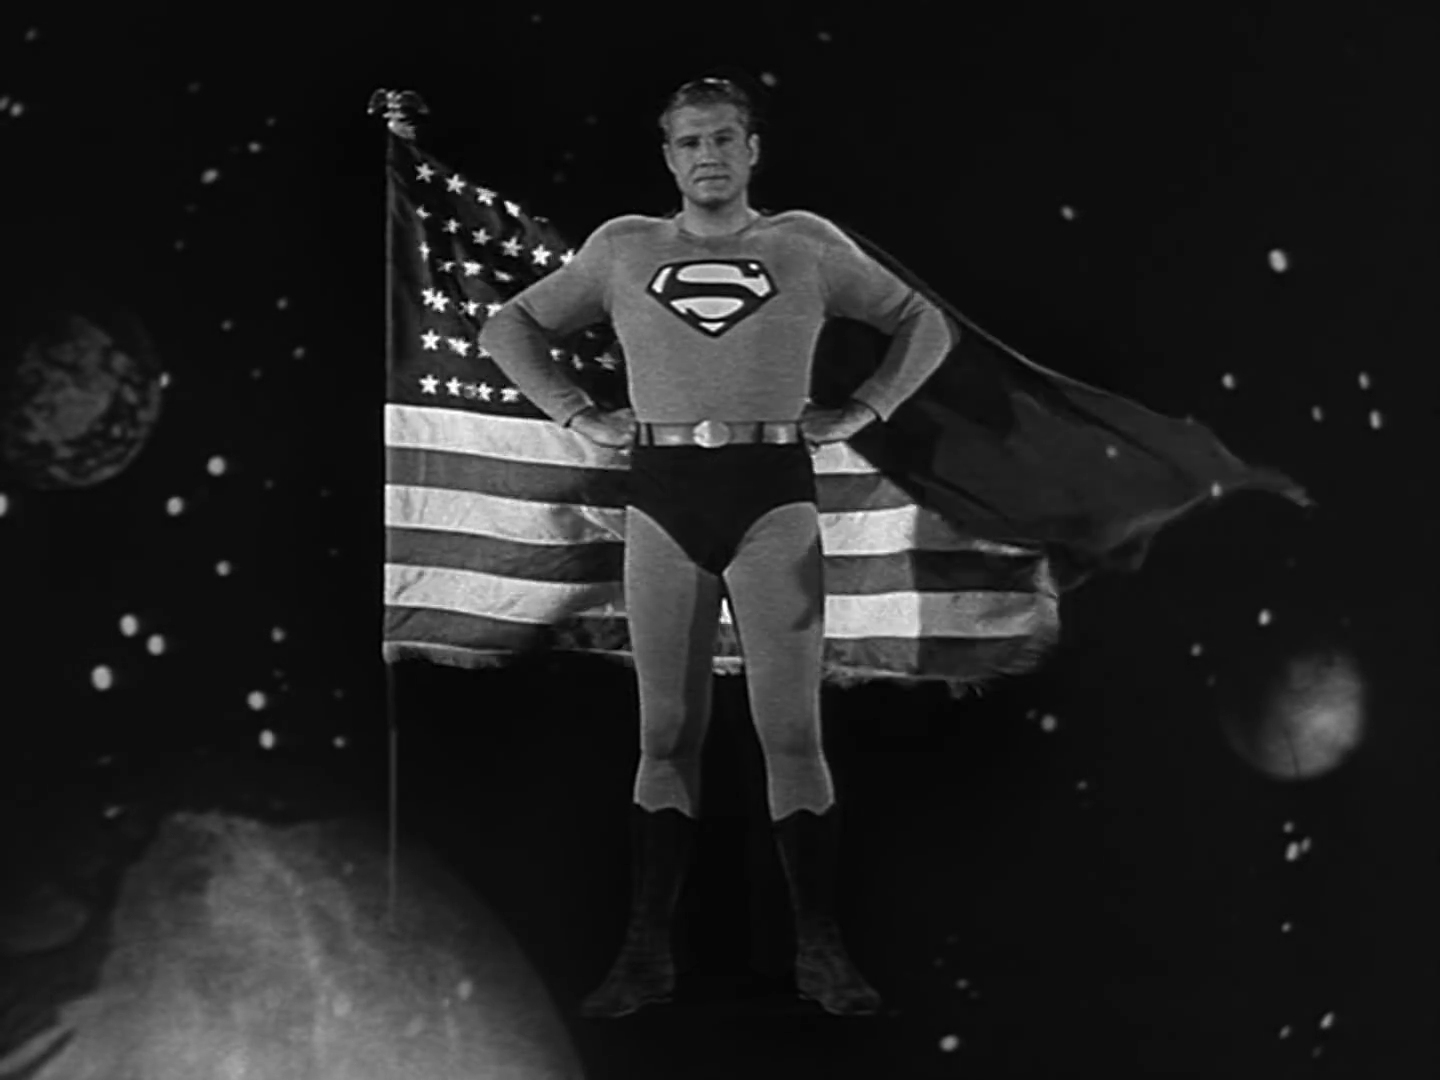 George Reeves as Superman in the Adventures of Superman TV show intro